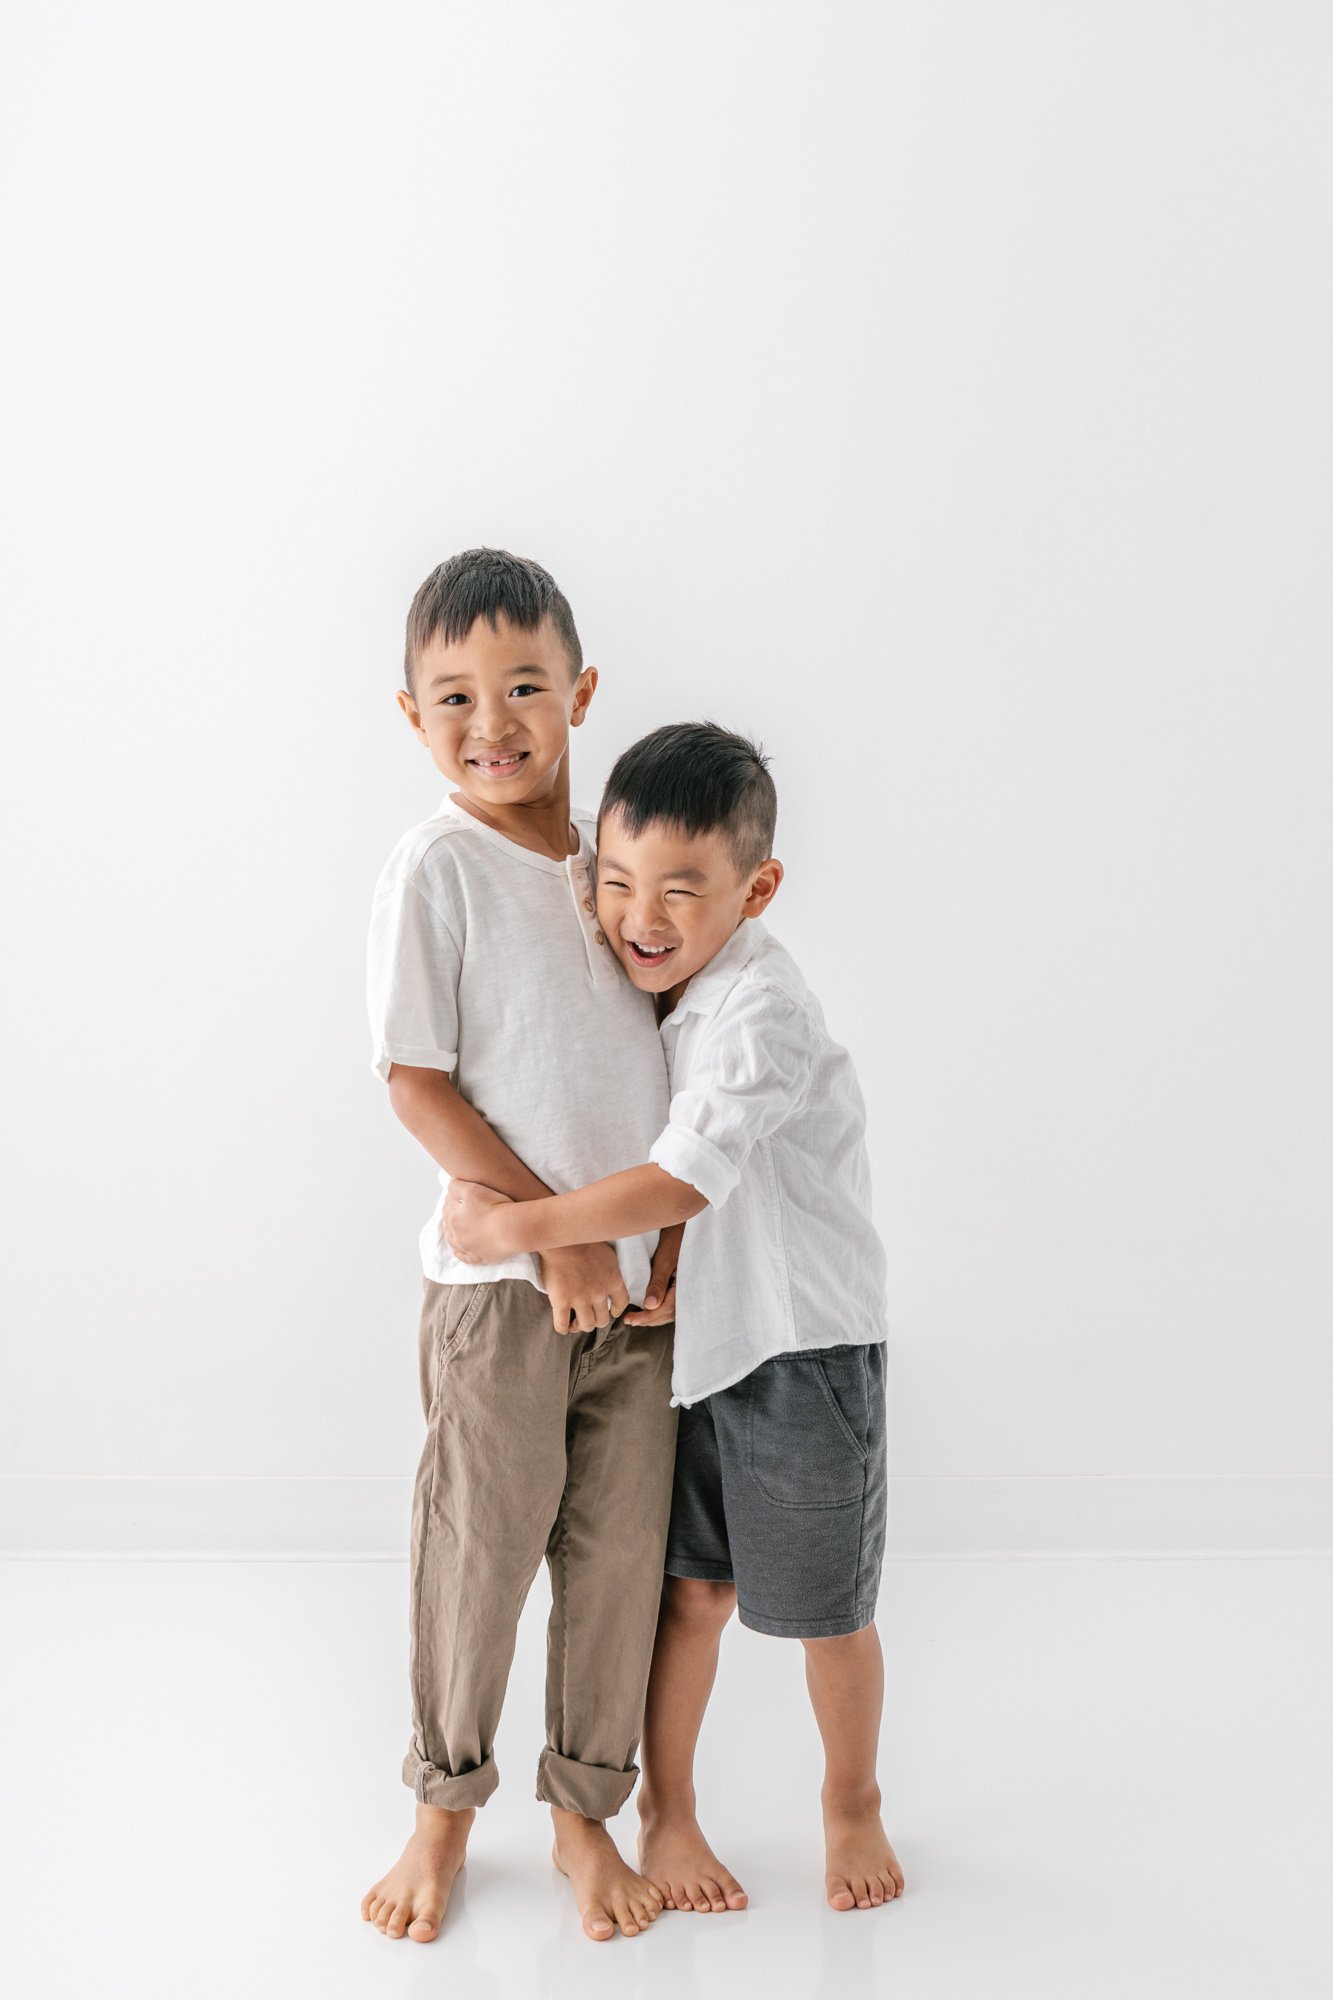    Two happy brothers sharing a hug at a newborn family photo session captured by Nicole Hawkins Photography in New Jersey. #studionewborns #studioportraits #babystudioportraits #NewJerseyPhotographers #NJfamilyphotographer   